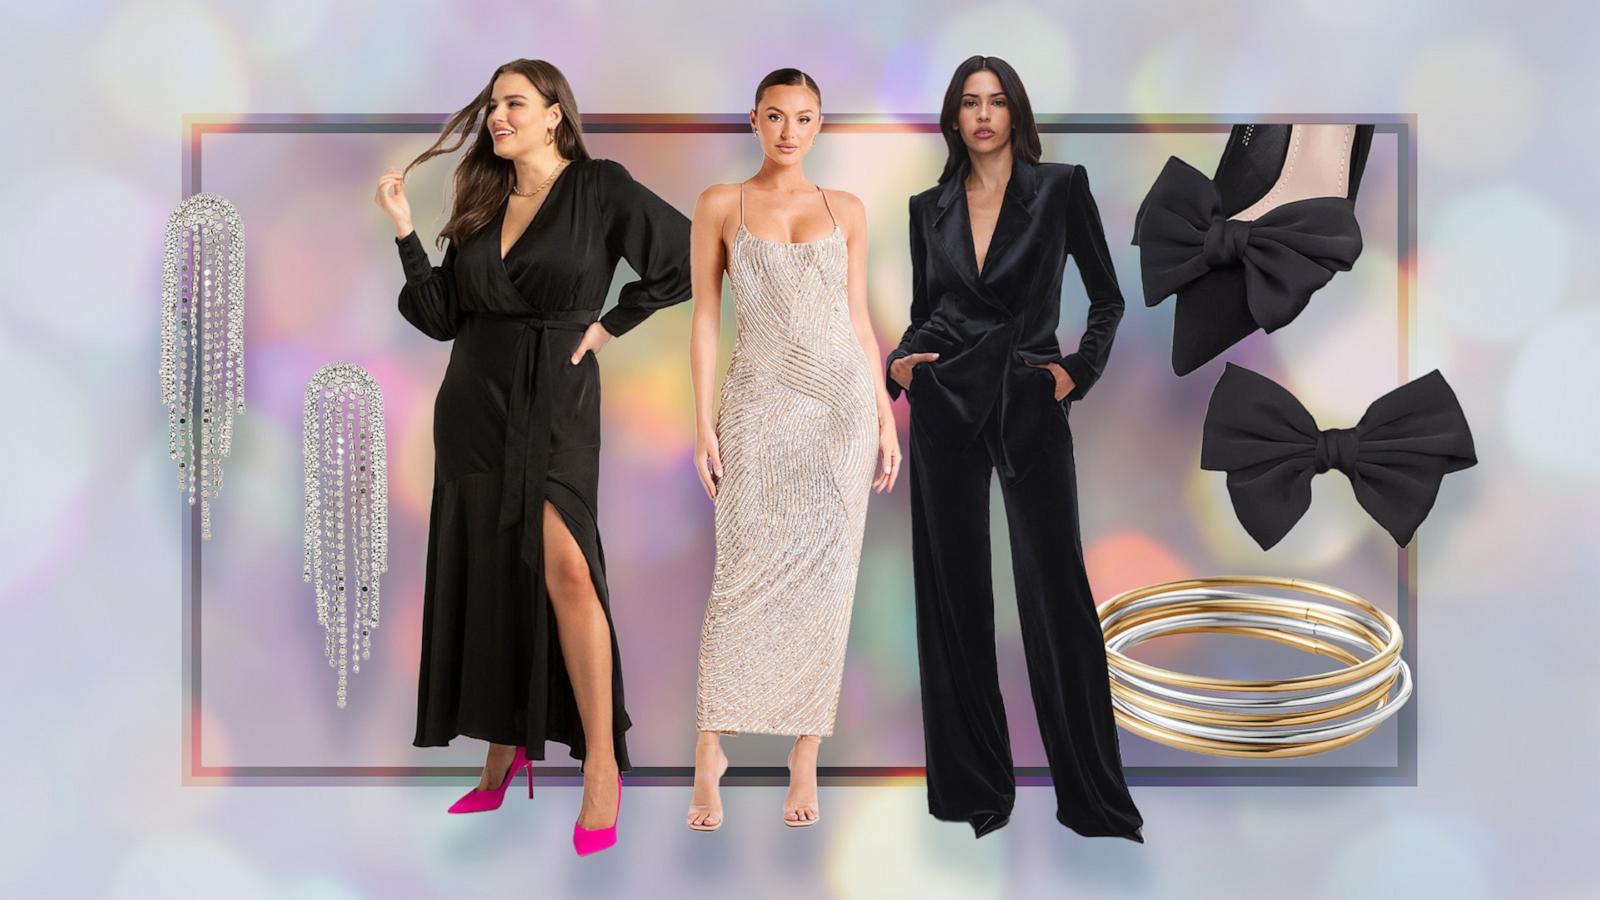 20 New Year's Eve Dresses for Women 2022 - Where to Buy Holiday